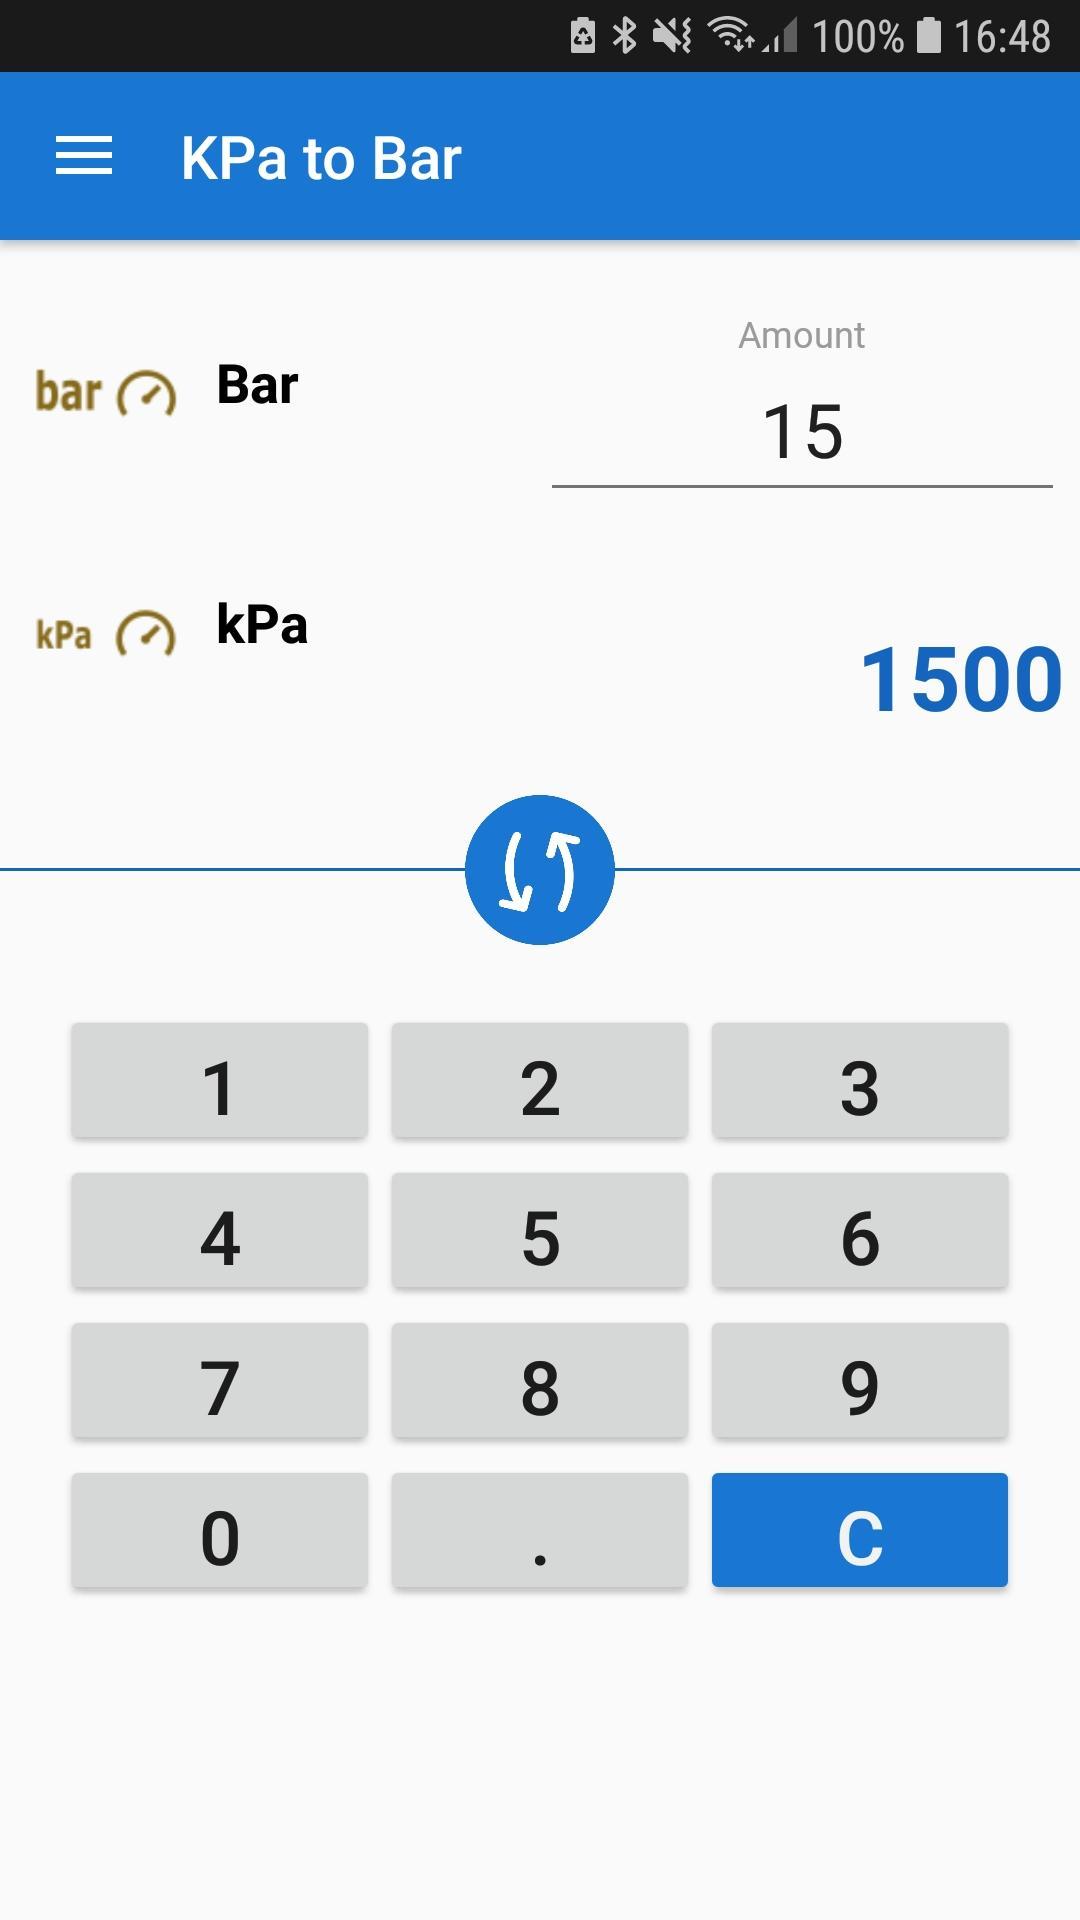 Kpa to Bar / Kilopascal to Bar Converter for Android - APK Download